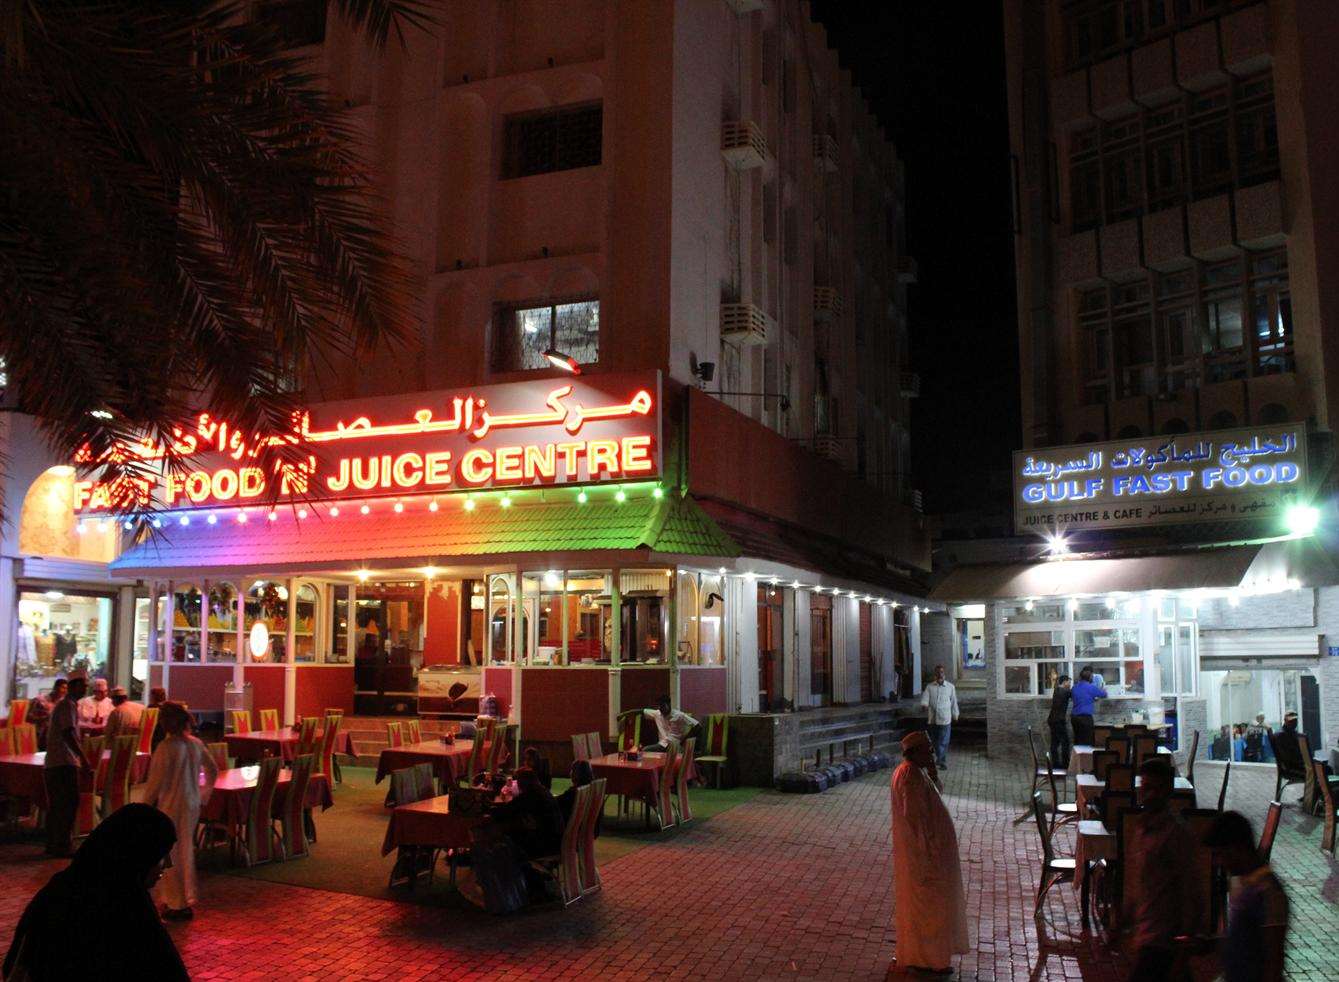 Fast food stores illuminate a market square in Muscat, Oman. Picture: Ed McConnell